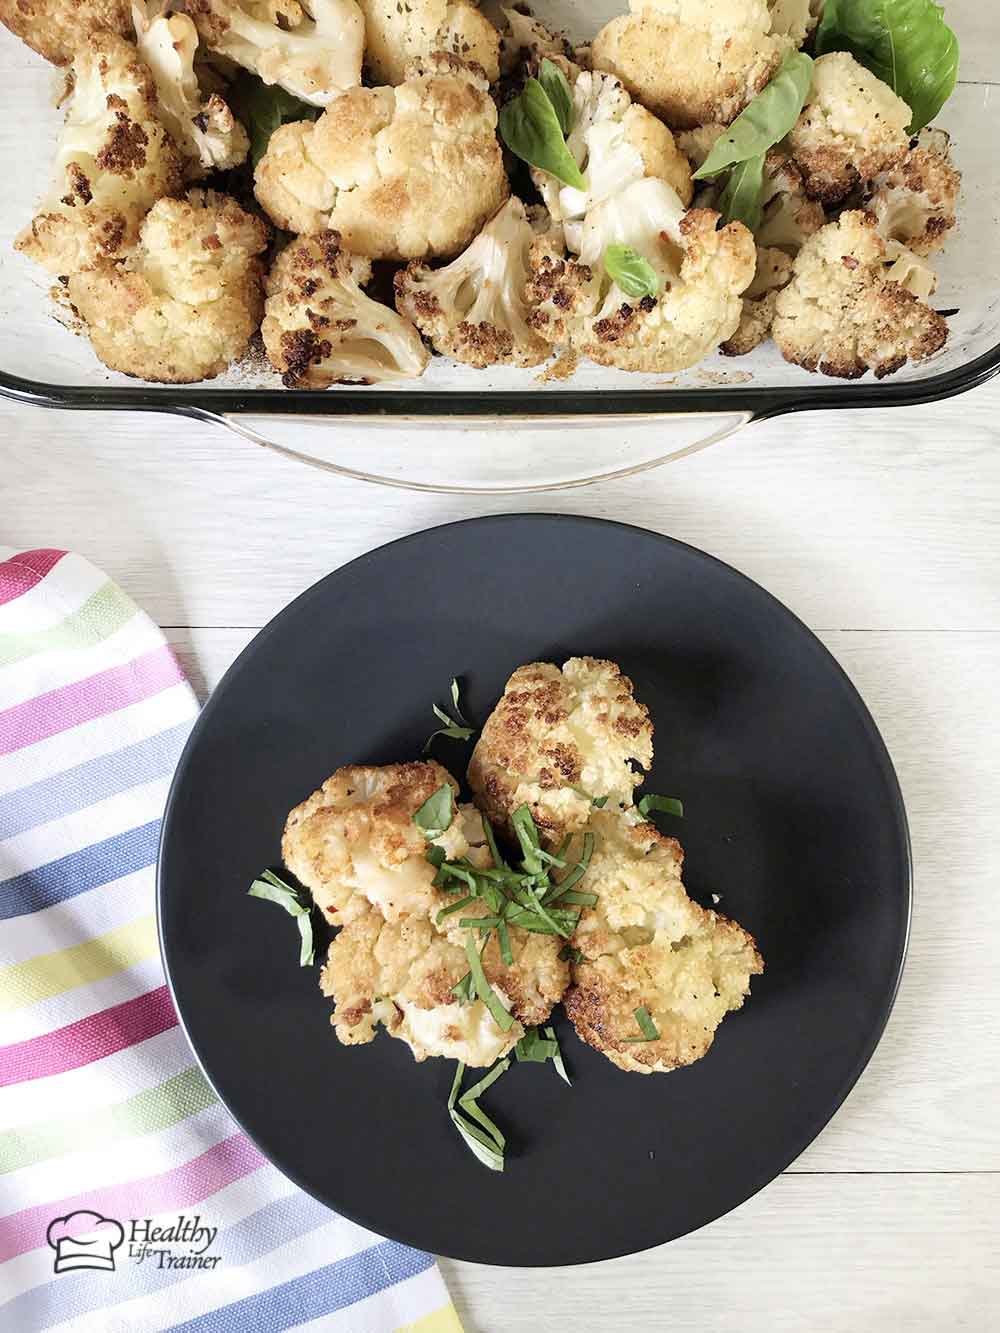 Vegan roasted cauliflower with garlic in a serving plate.